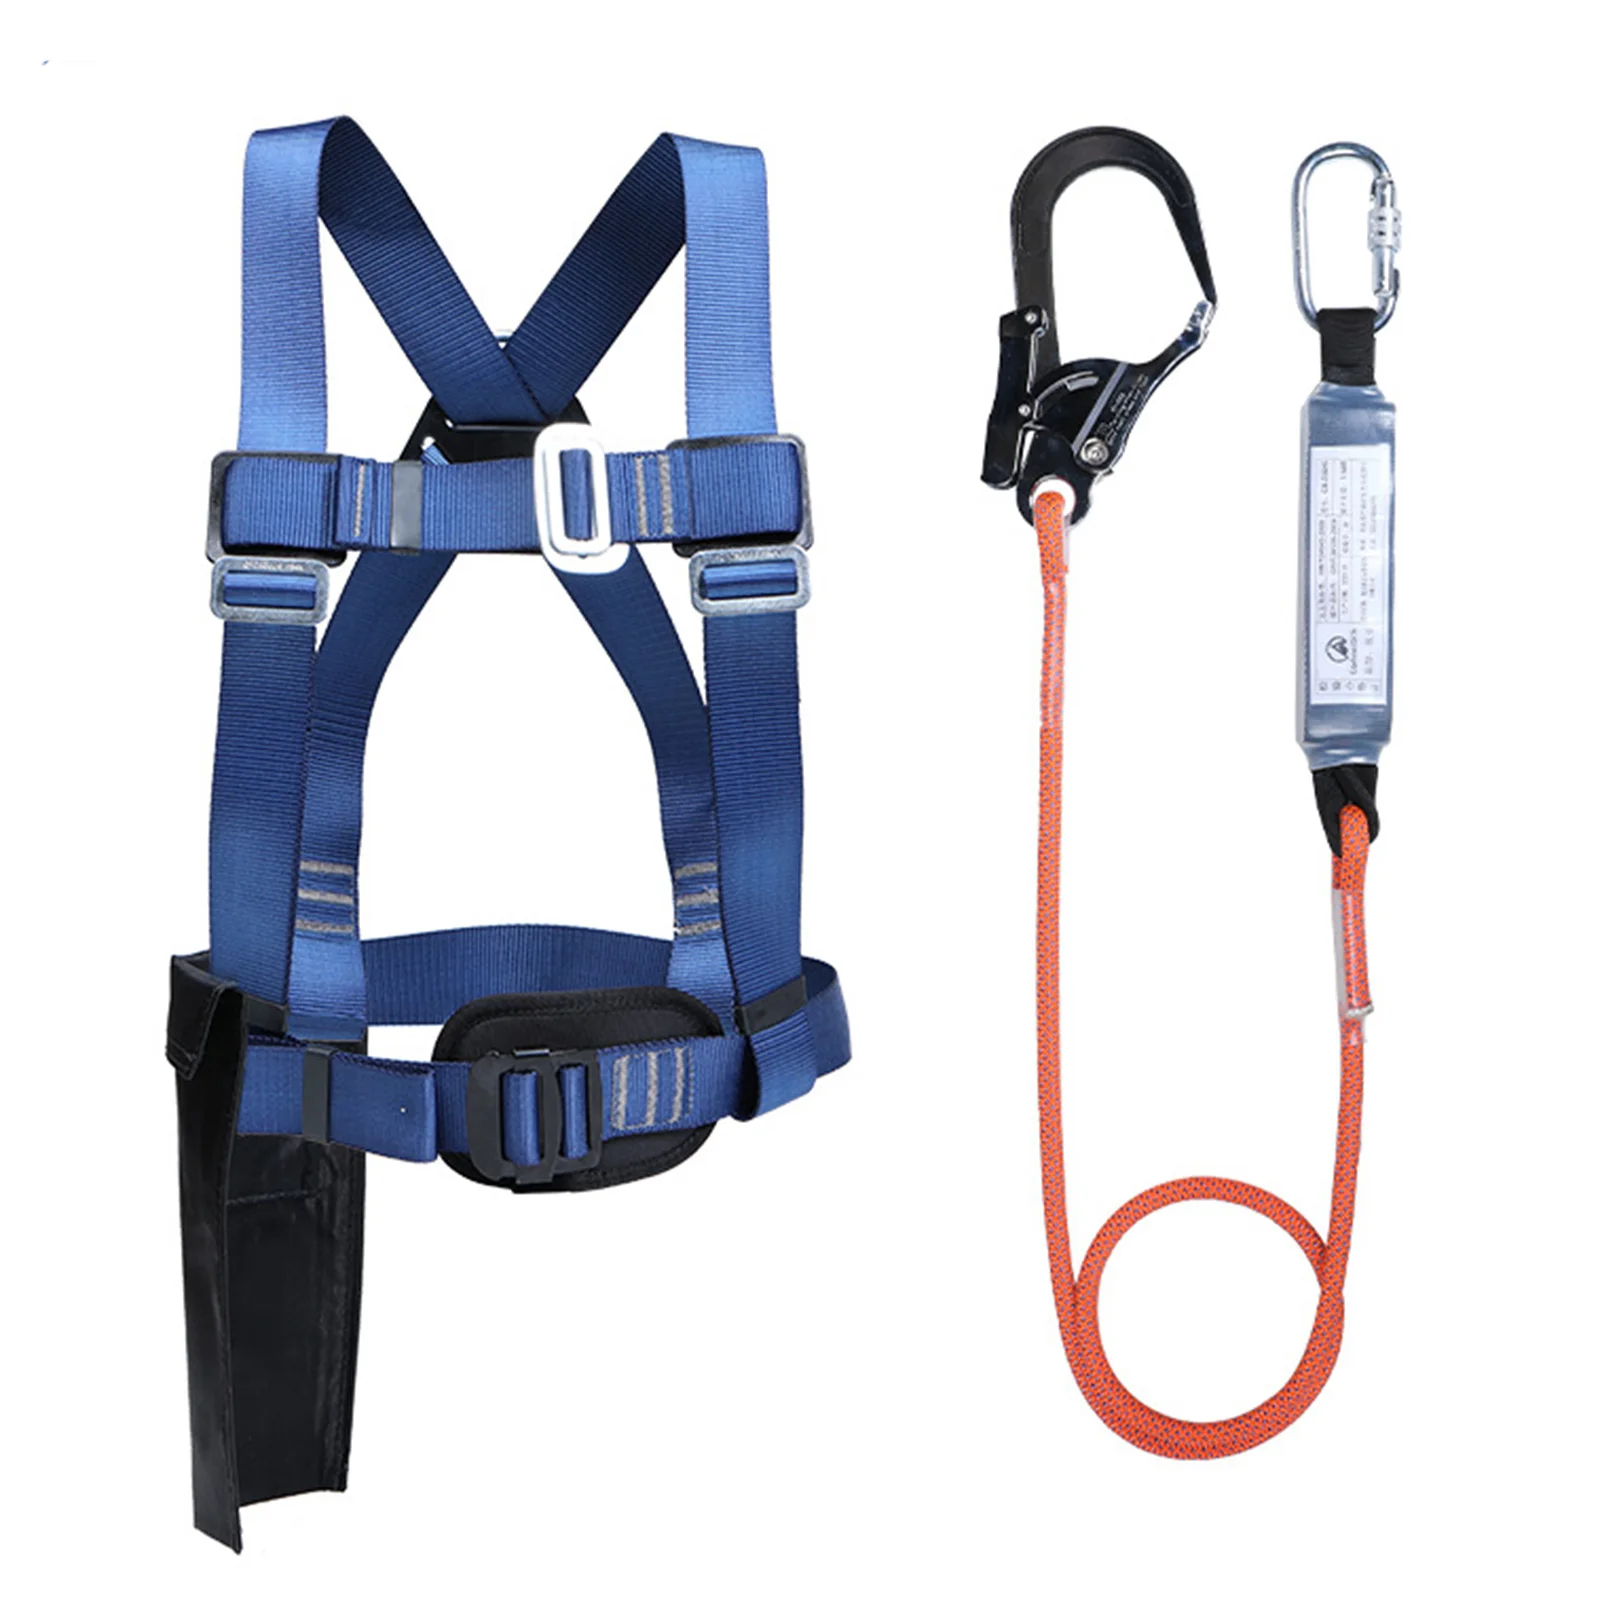 Safety Harness Fall Prevention Safety Rope Climbing Fall Protection Shock Absorbing Harness Full-body Safety Belt For